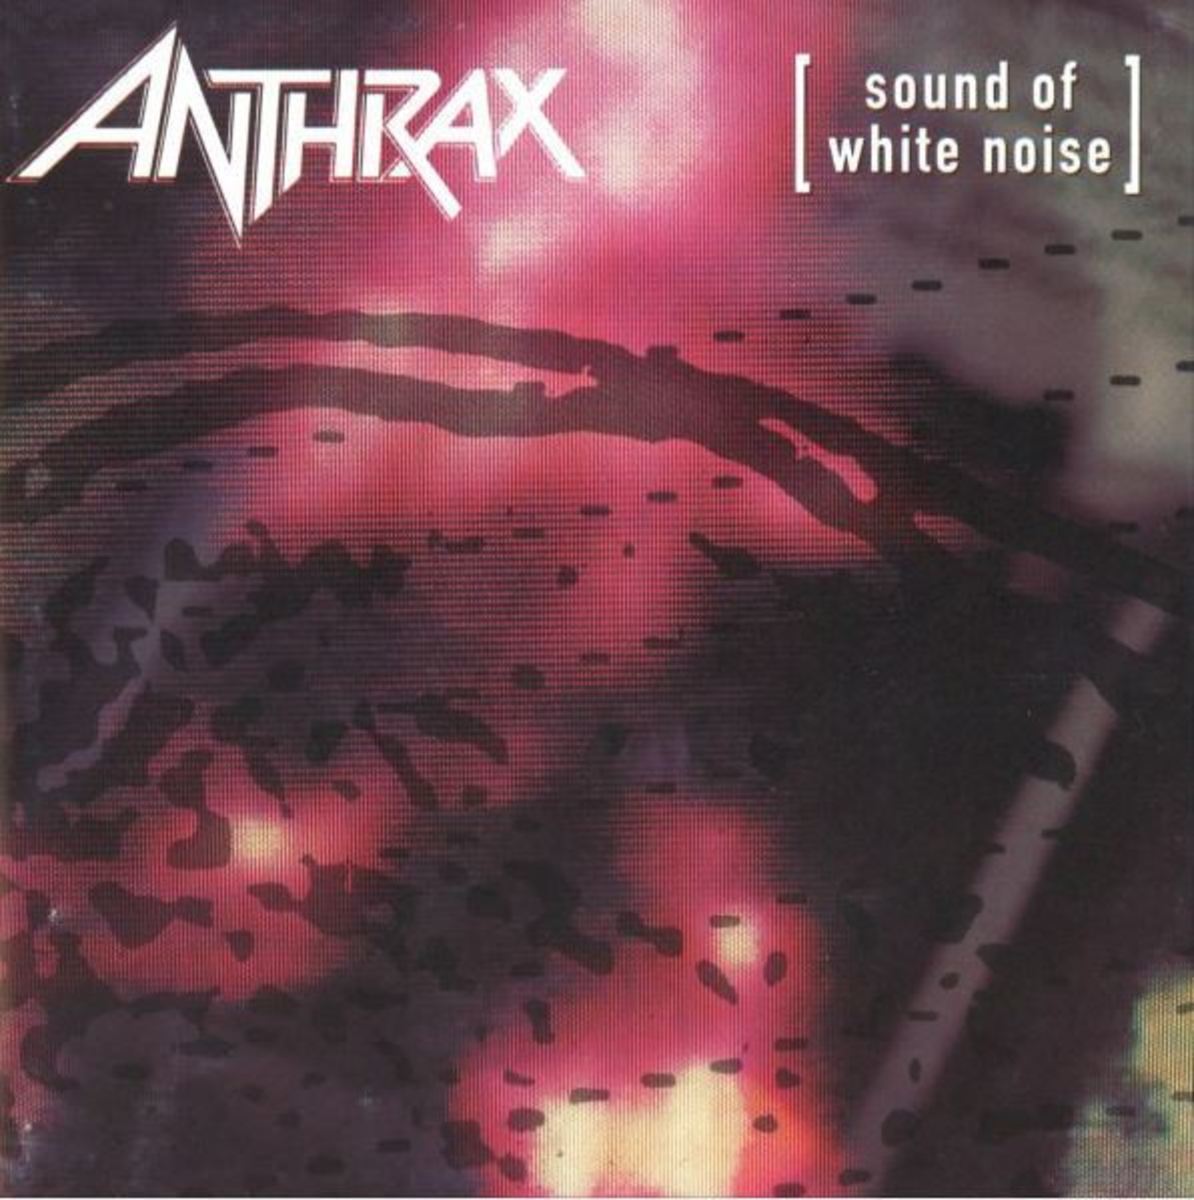 revisiting-sound-of-white-noise-by-anthrax